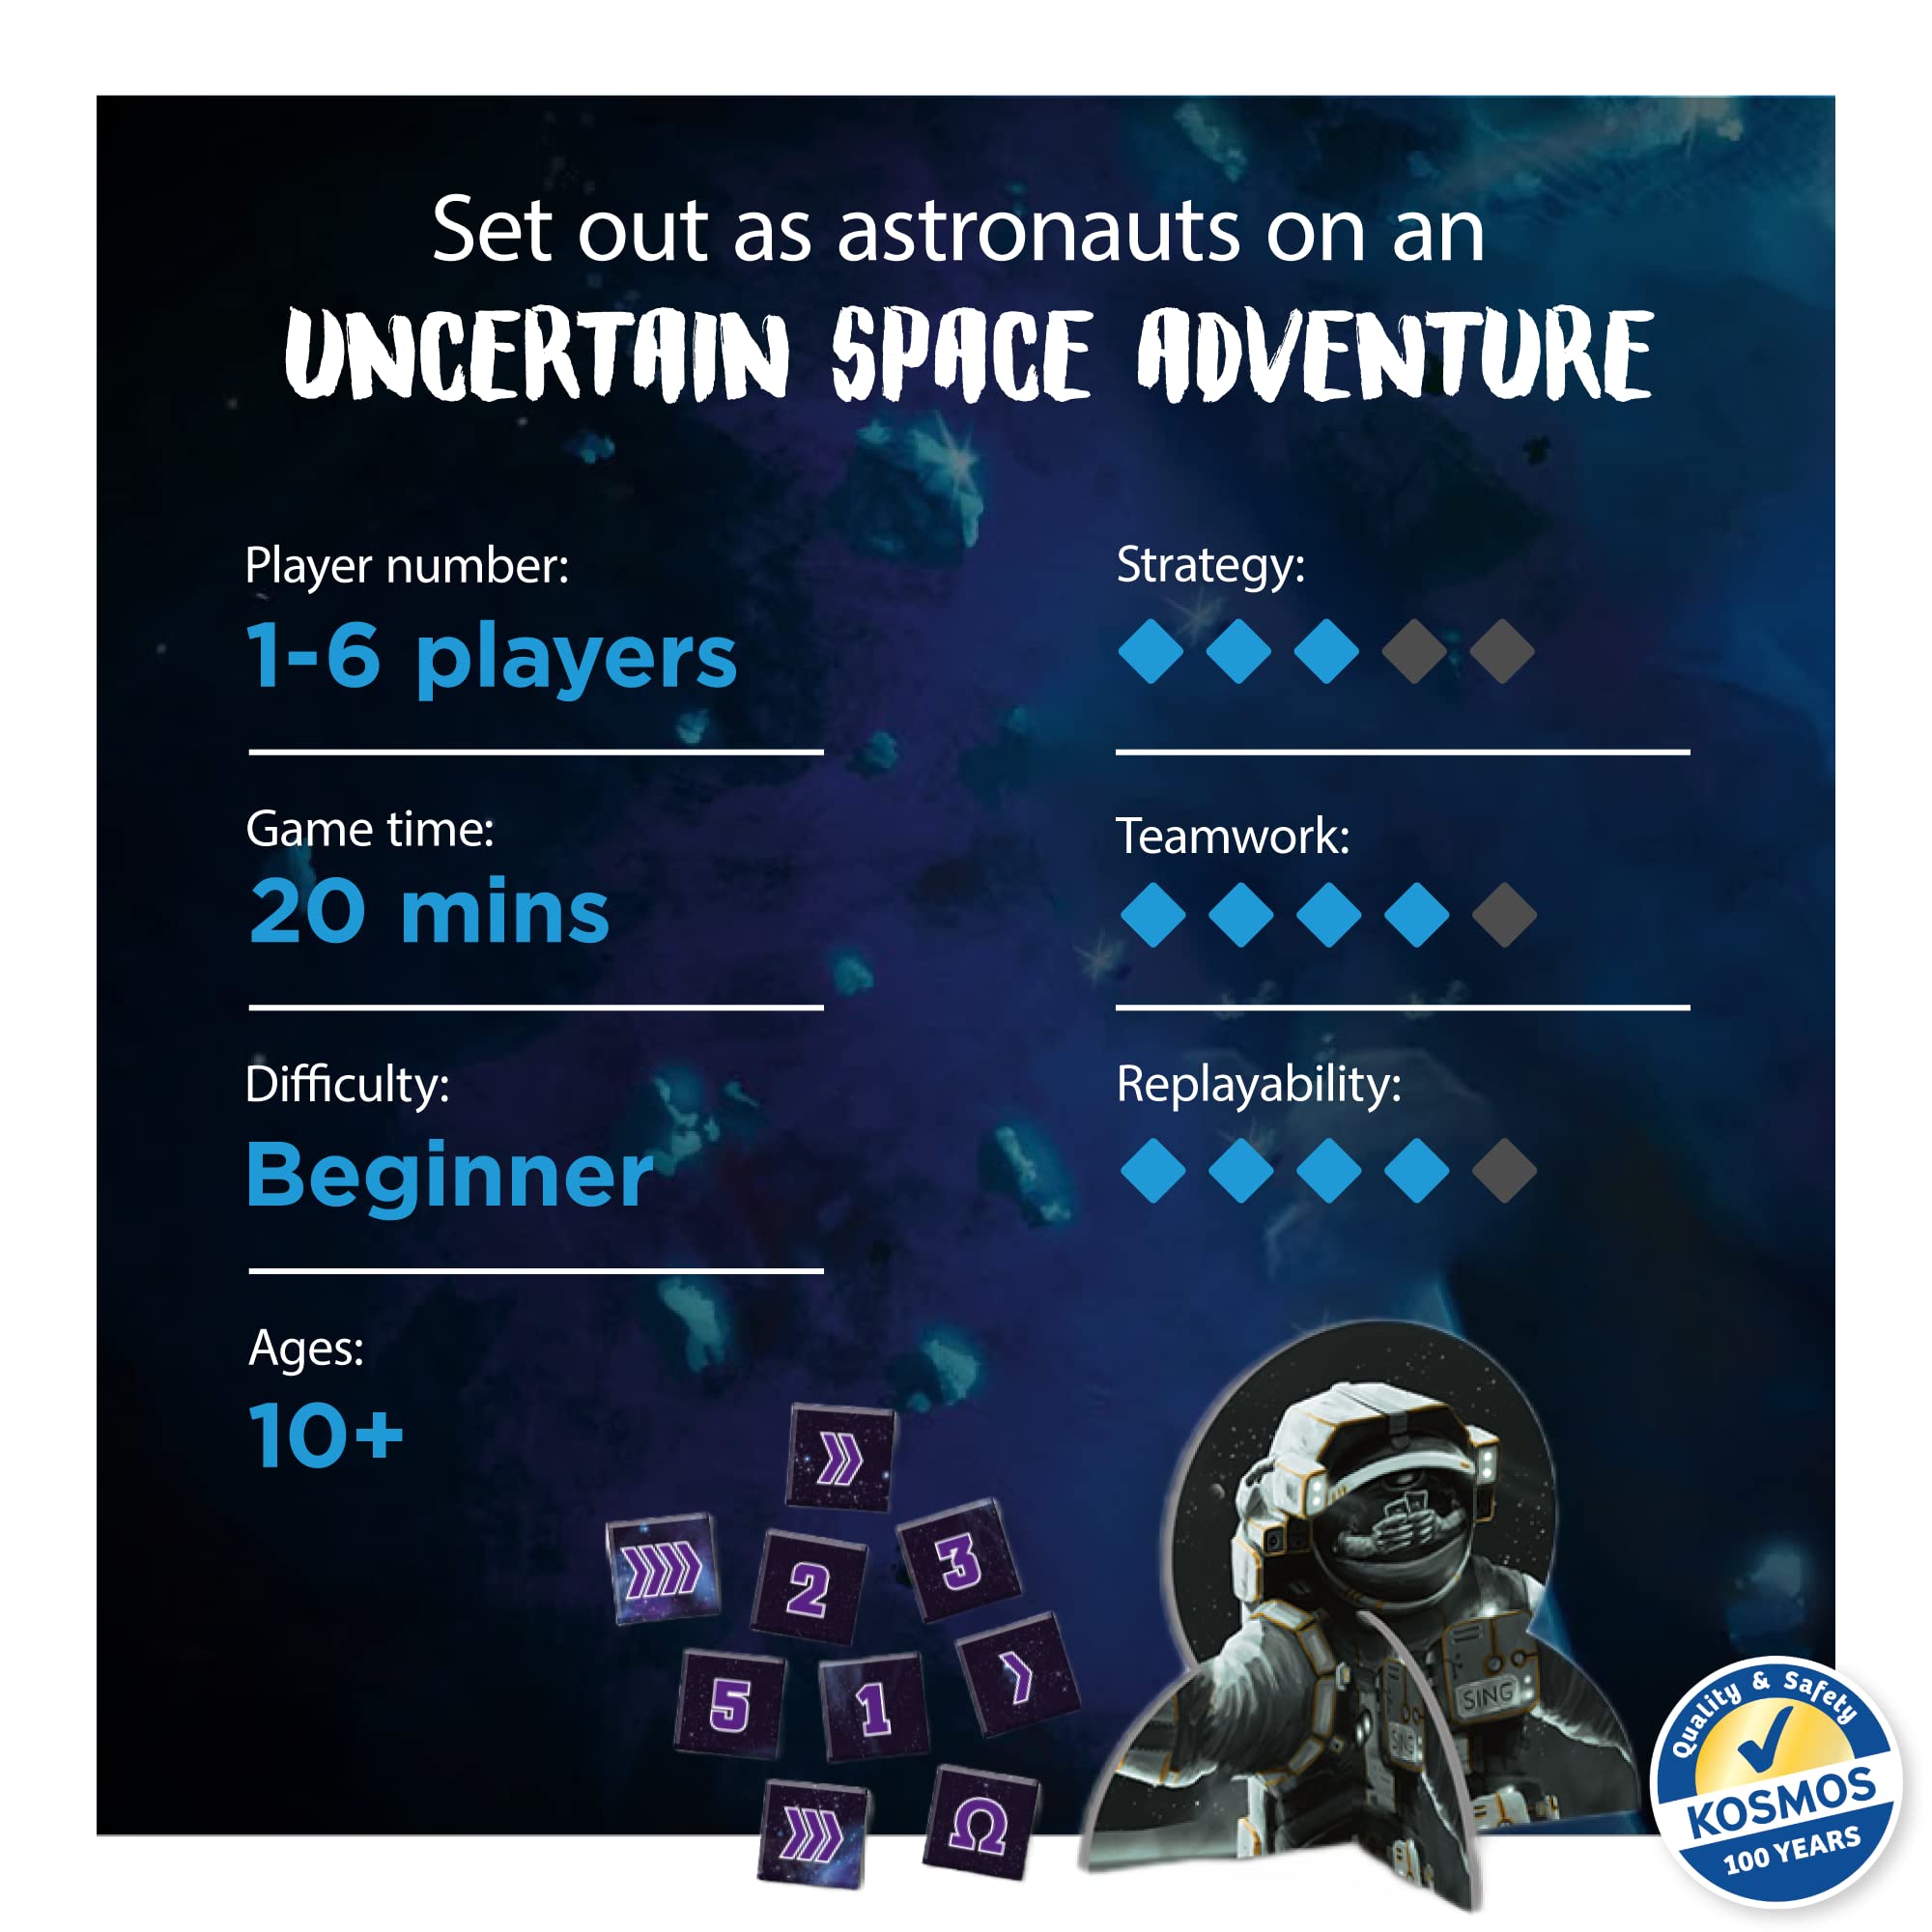 The Crew - Quest for Planet Nine | Card Game | Kennerspiel des Jahres Winner | Cooperative Space Adventure | 3-5 Players | Ages 10+ | Trick-Taking | 50 Levels of Difficulty | Endless Replay